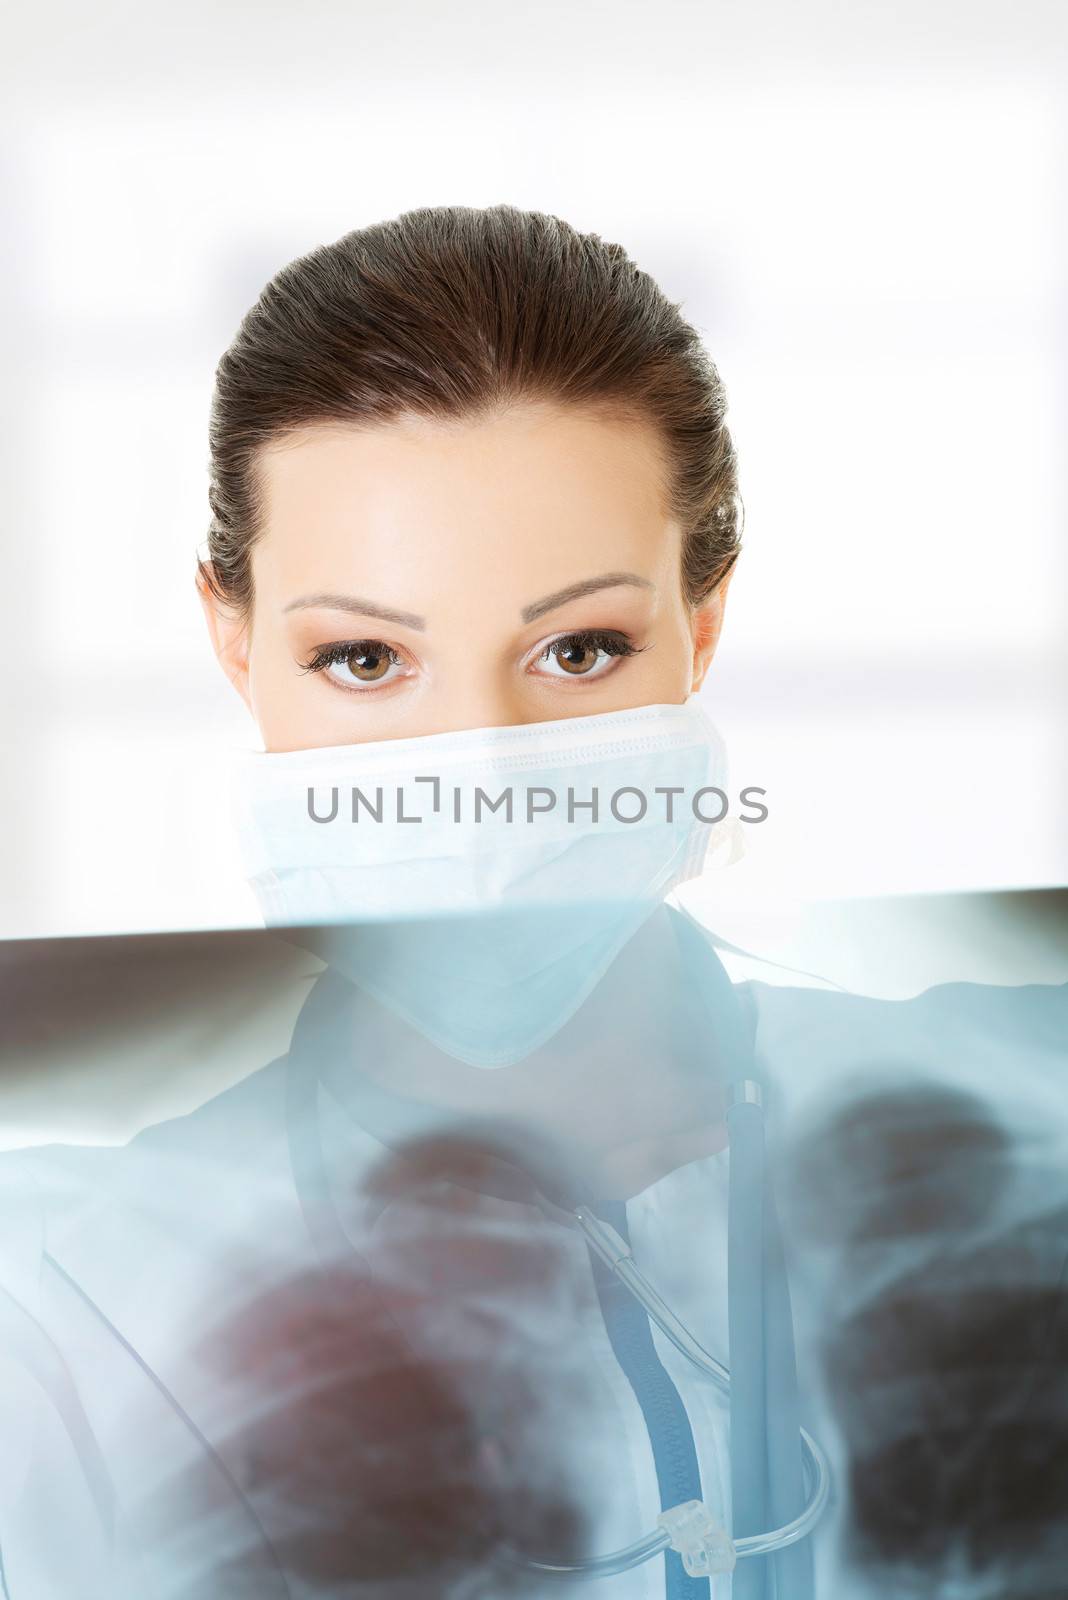 Female doctor or nurse looking at radiography photo , isolated on white